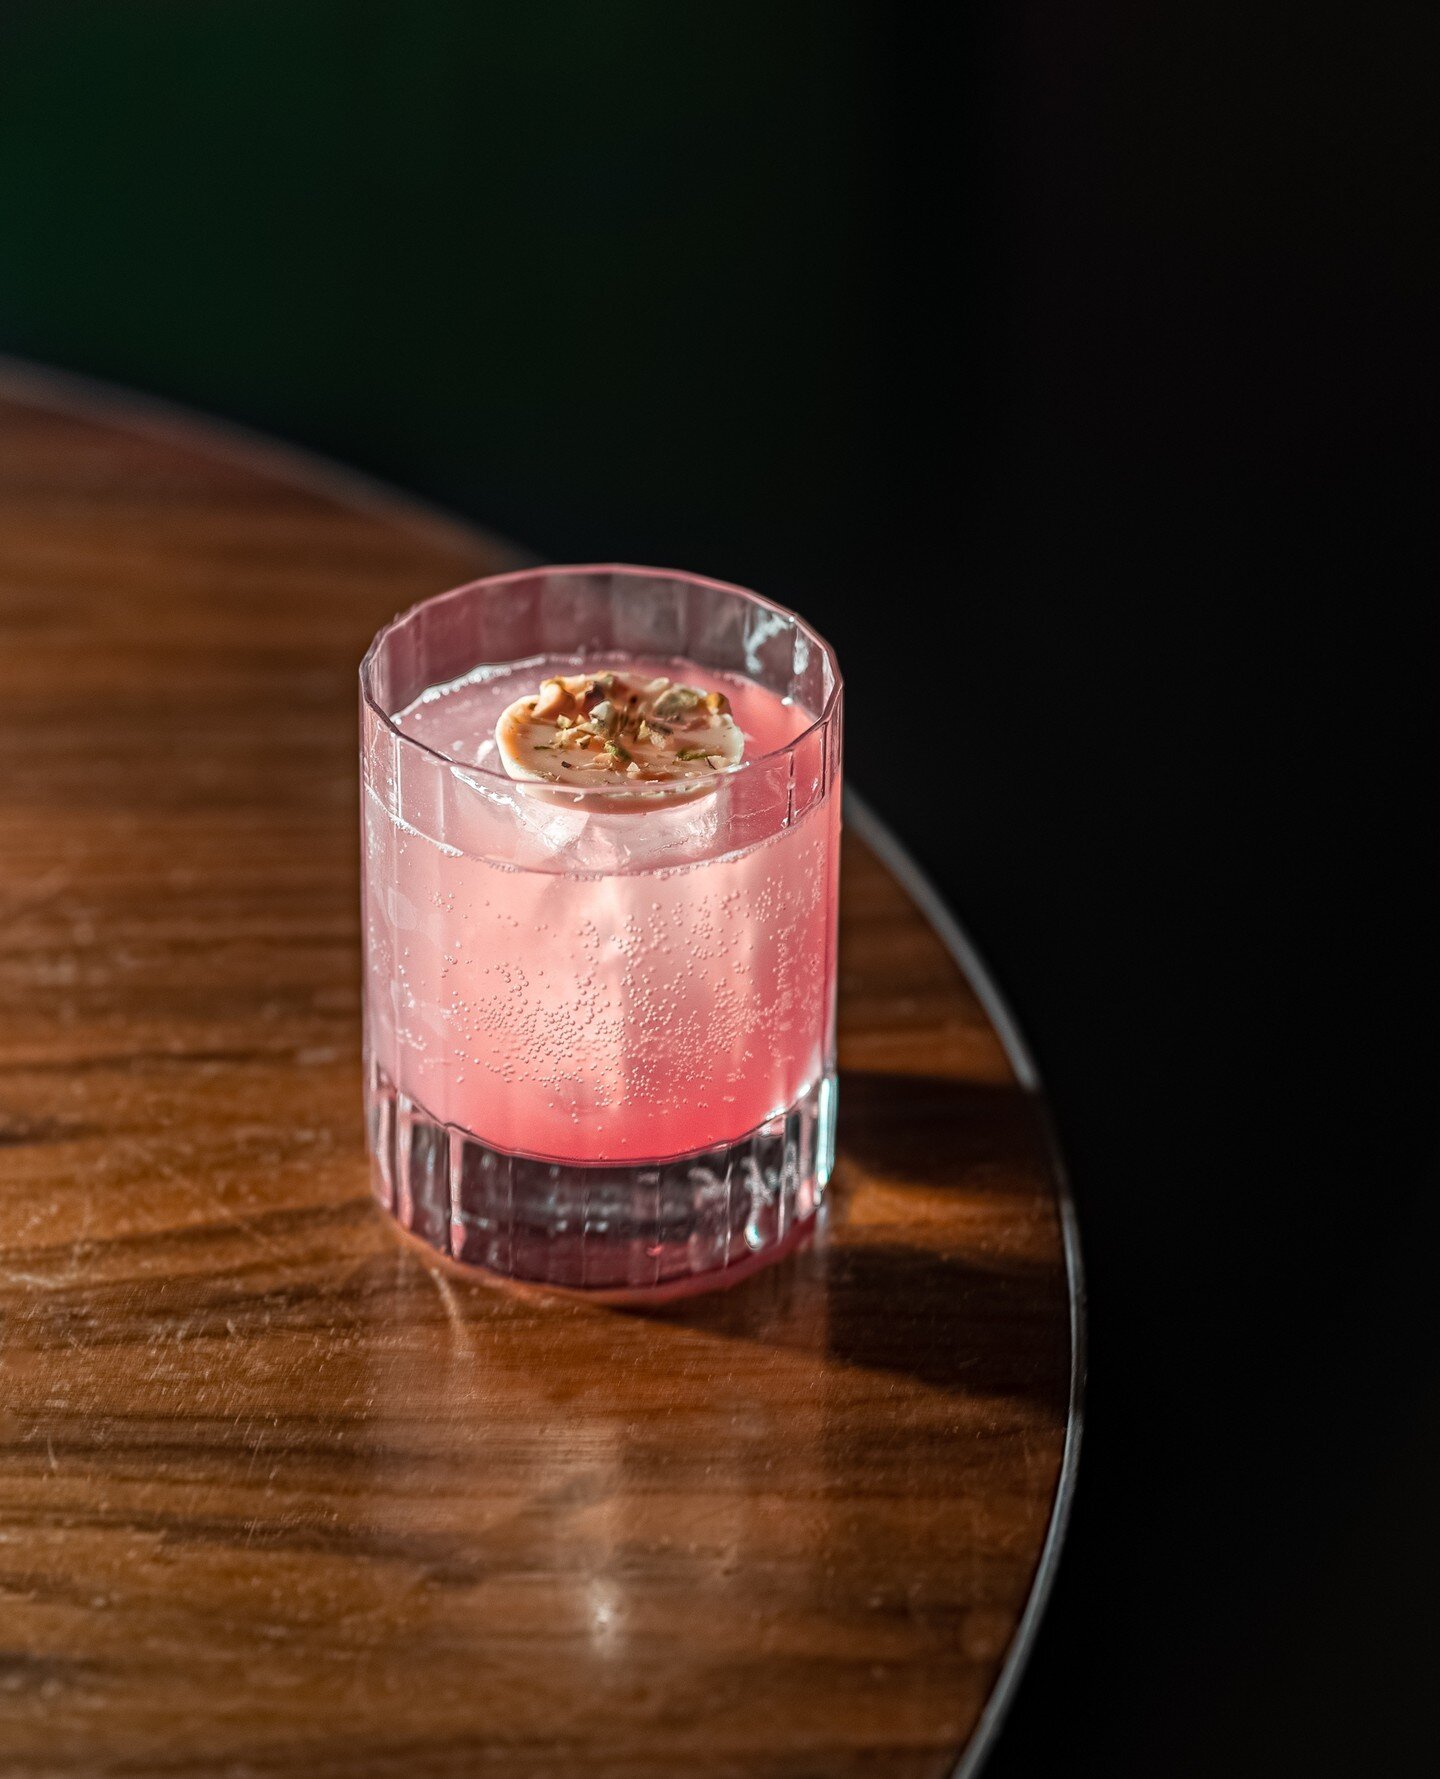 Discover your new favourite cocktail at Maybe Mae 💕⁠
⁠
Open from 5pm 'til late, everyday.⁠
⁠
#MaybeMae #Cocktails #Bar #WorldsBestBars #50BestDiscovery #CocktailsAndGoodVibes⁠ #CocktailLover